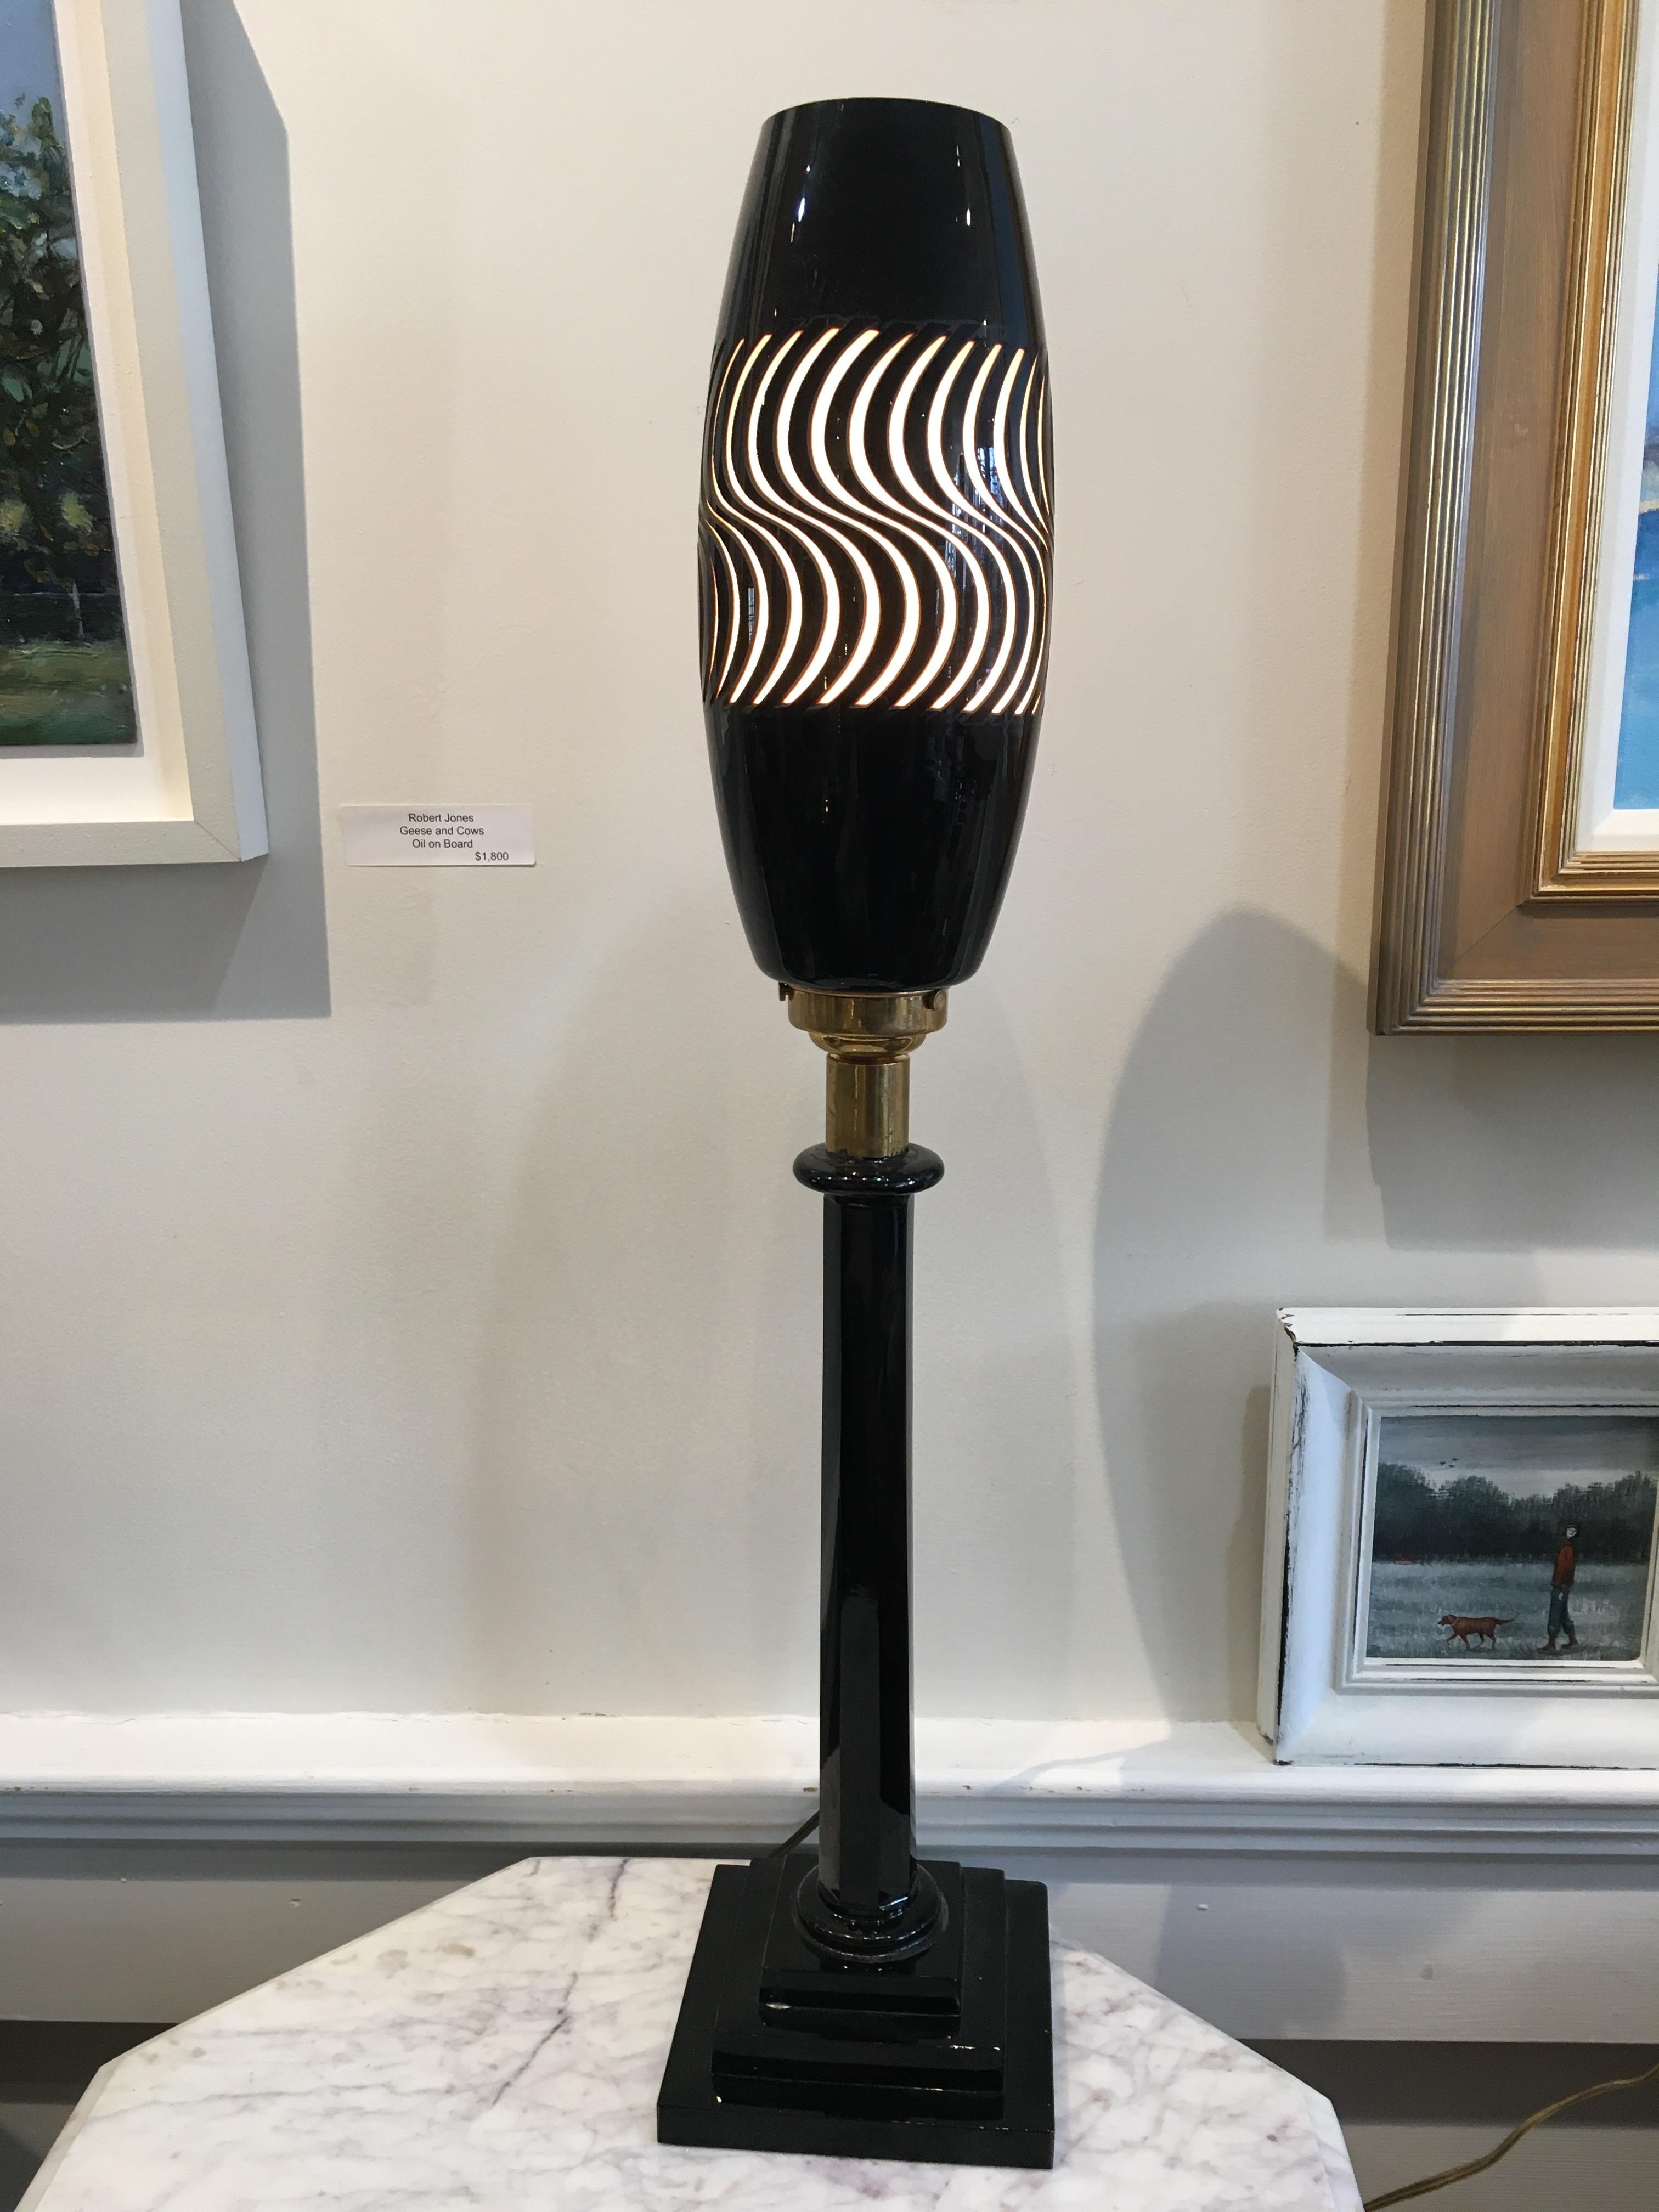 A very cool 1960s psychedelic table lamp in black glass and brass. Most of the lamp is black glass including the base, and brass where the light fixture component attached. The black glass shade has been cut away making a cool pattern that is backed